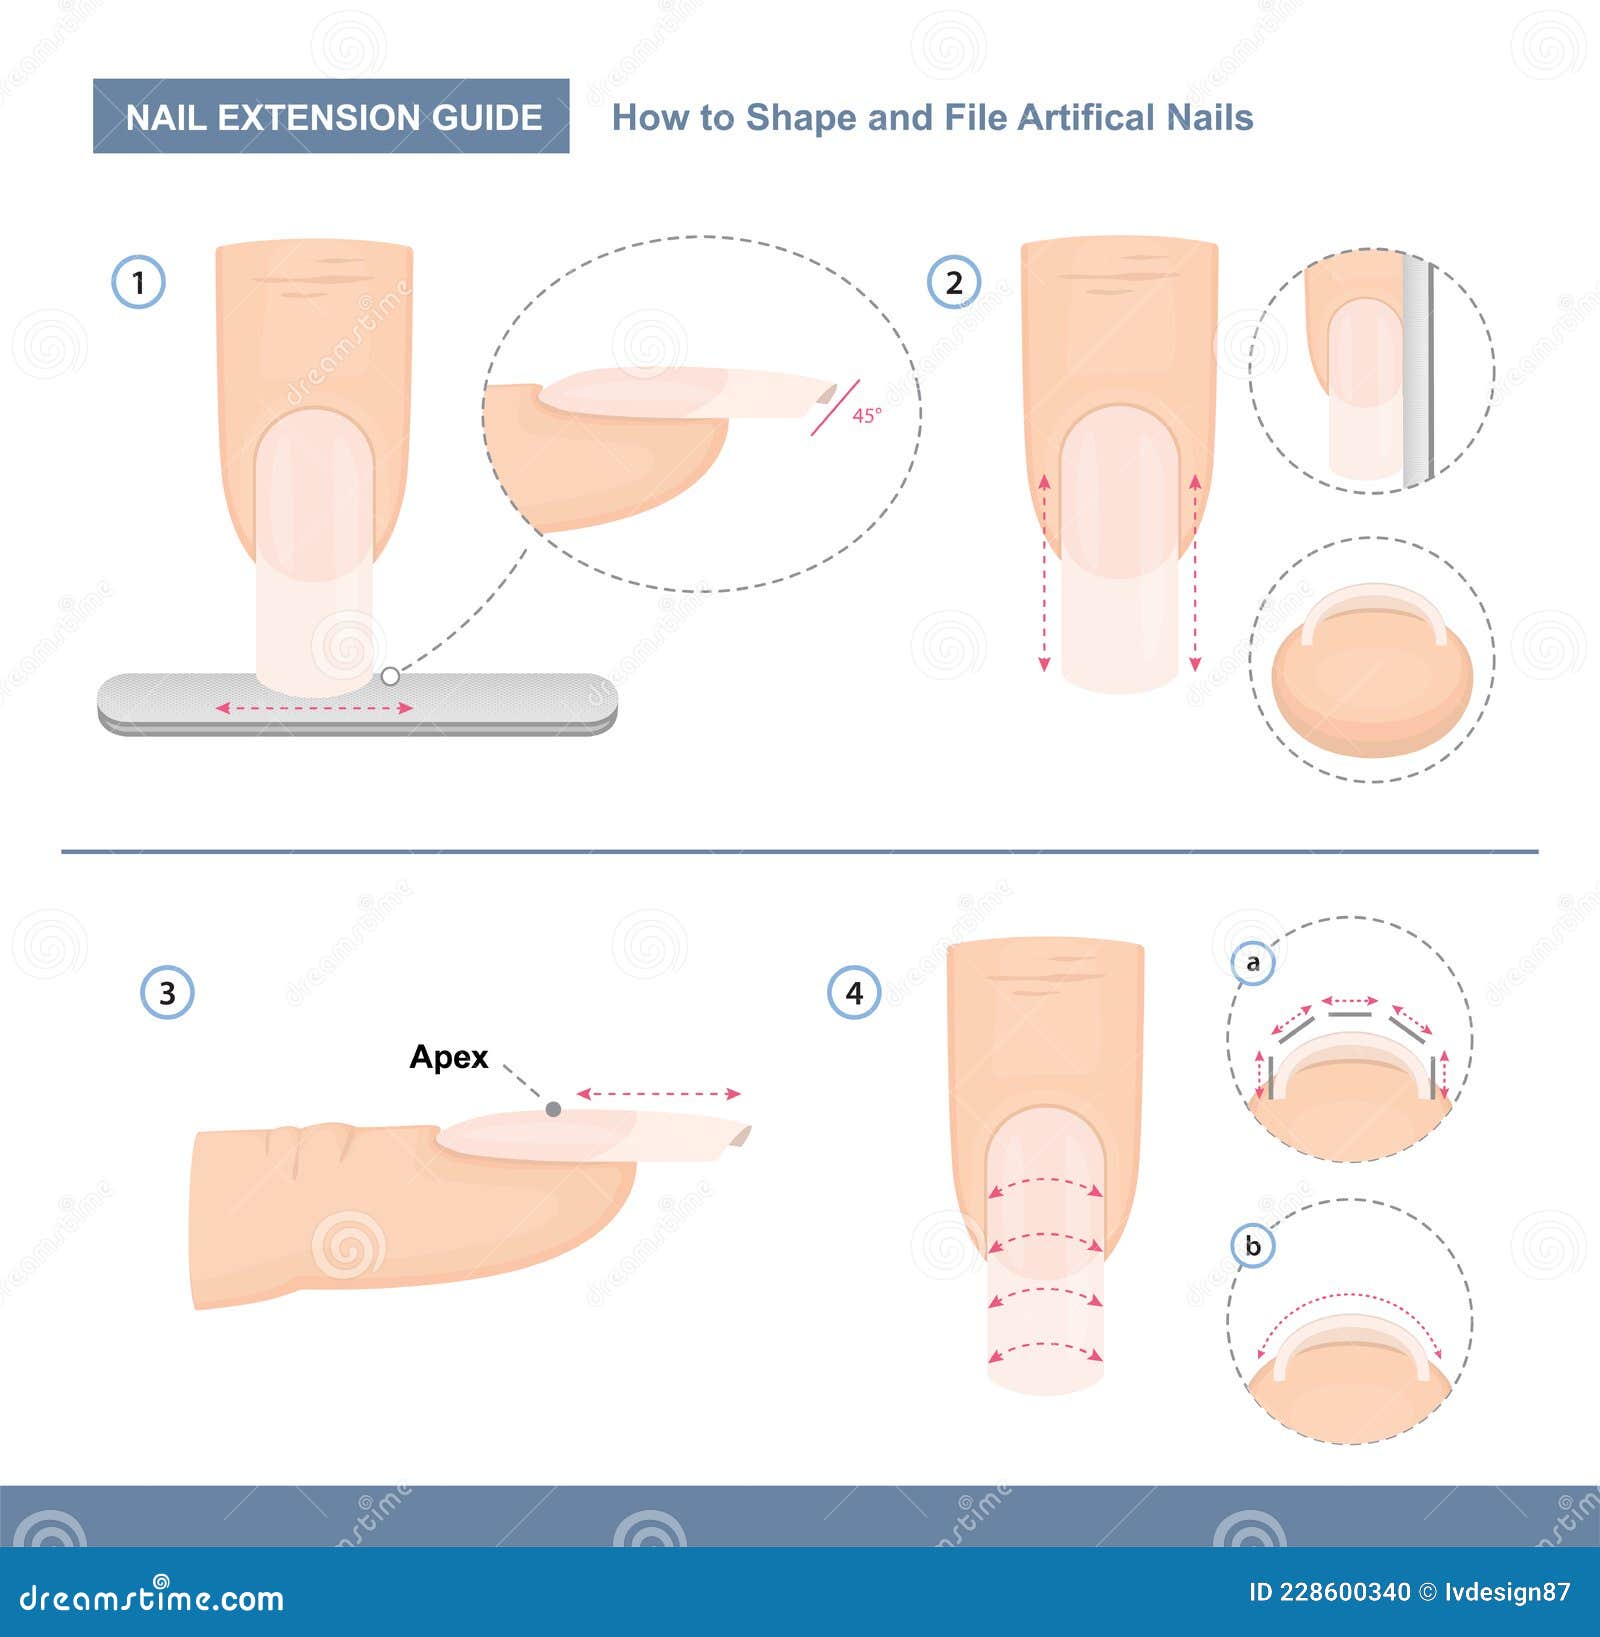 nail extension guide. how to  and file artificial nails the right way. step by step instruction. professional manicure